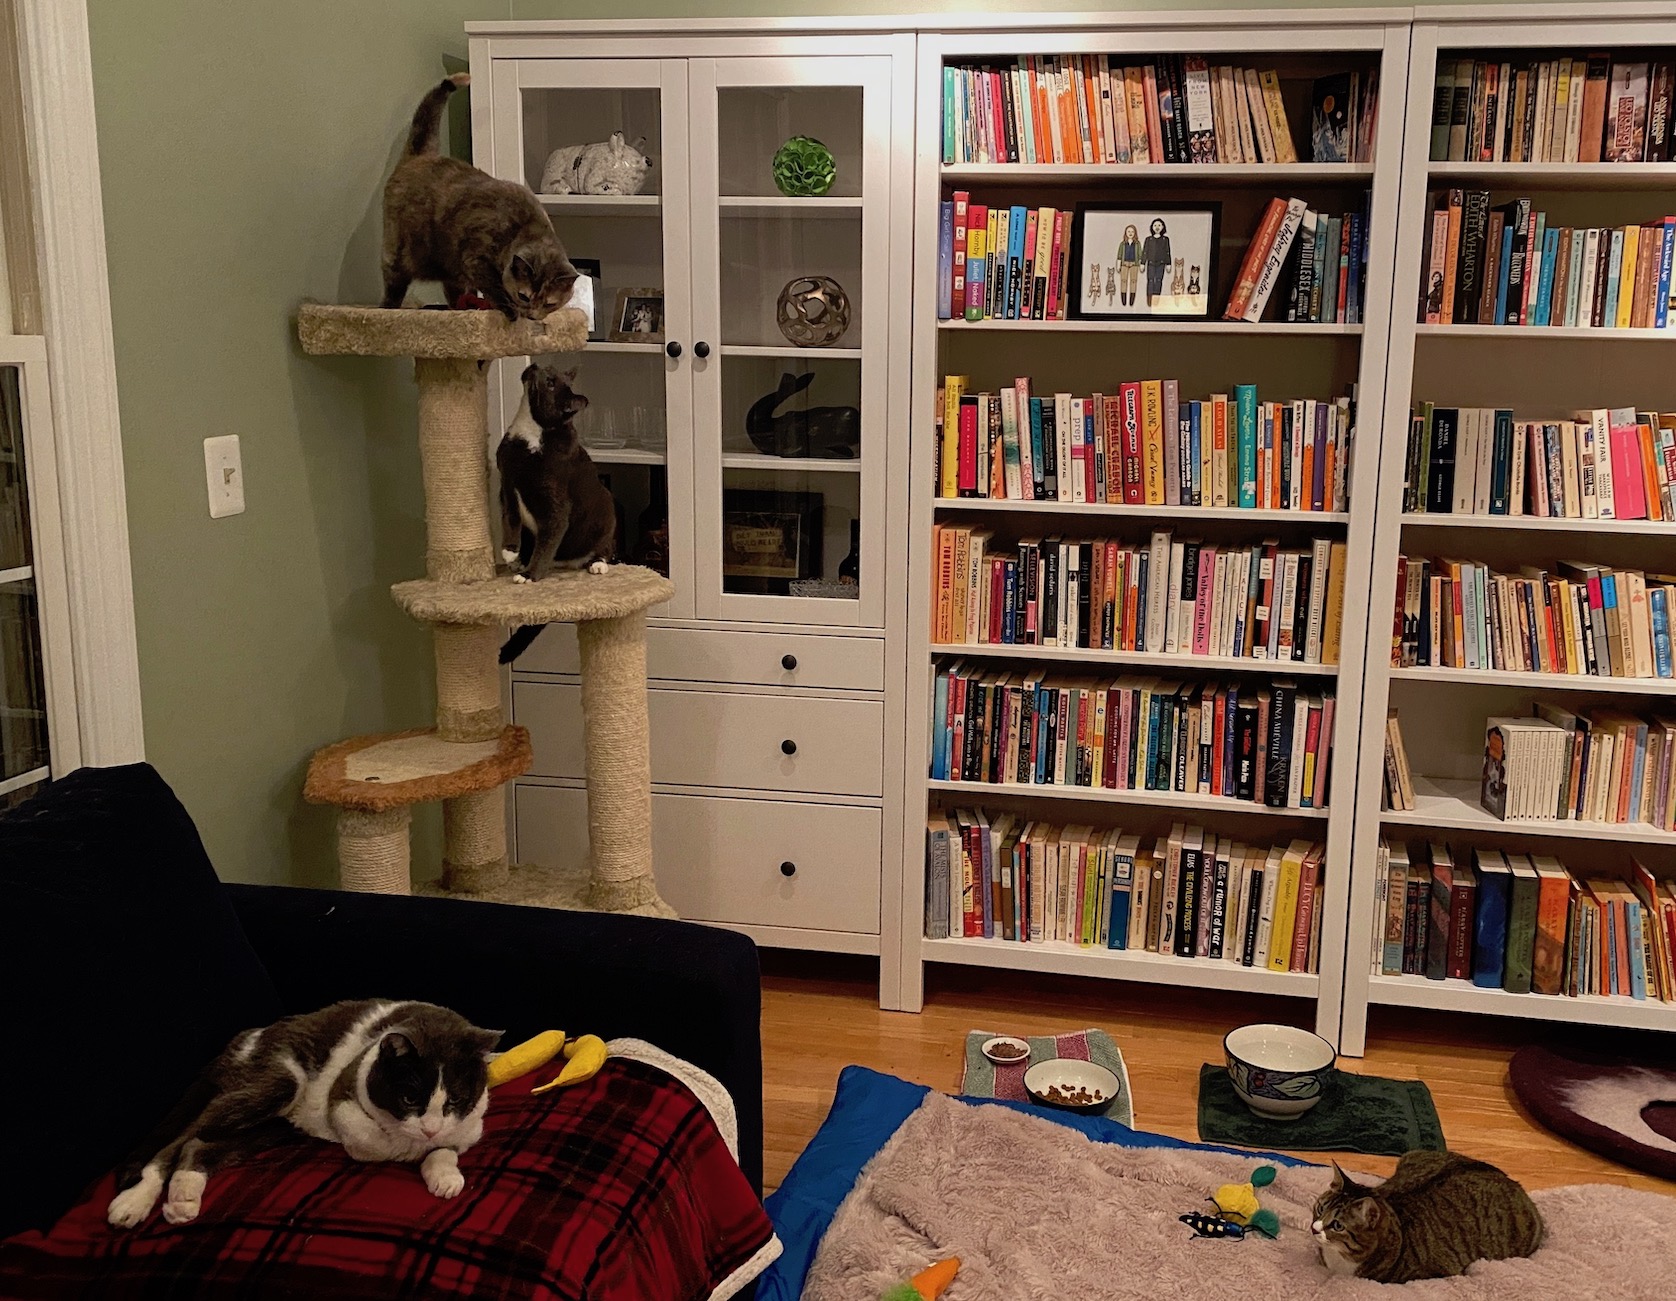 https://www.askamanager.org/wp-content/uploads/2020/02/cats-take-over-Humphreys-room.jpeg